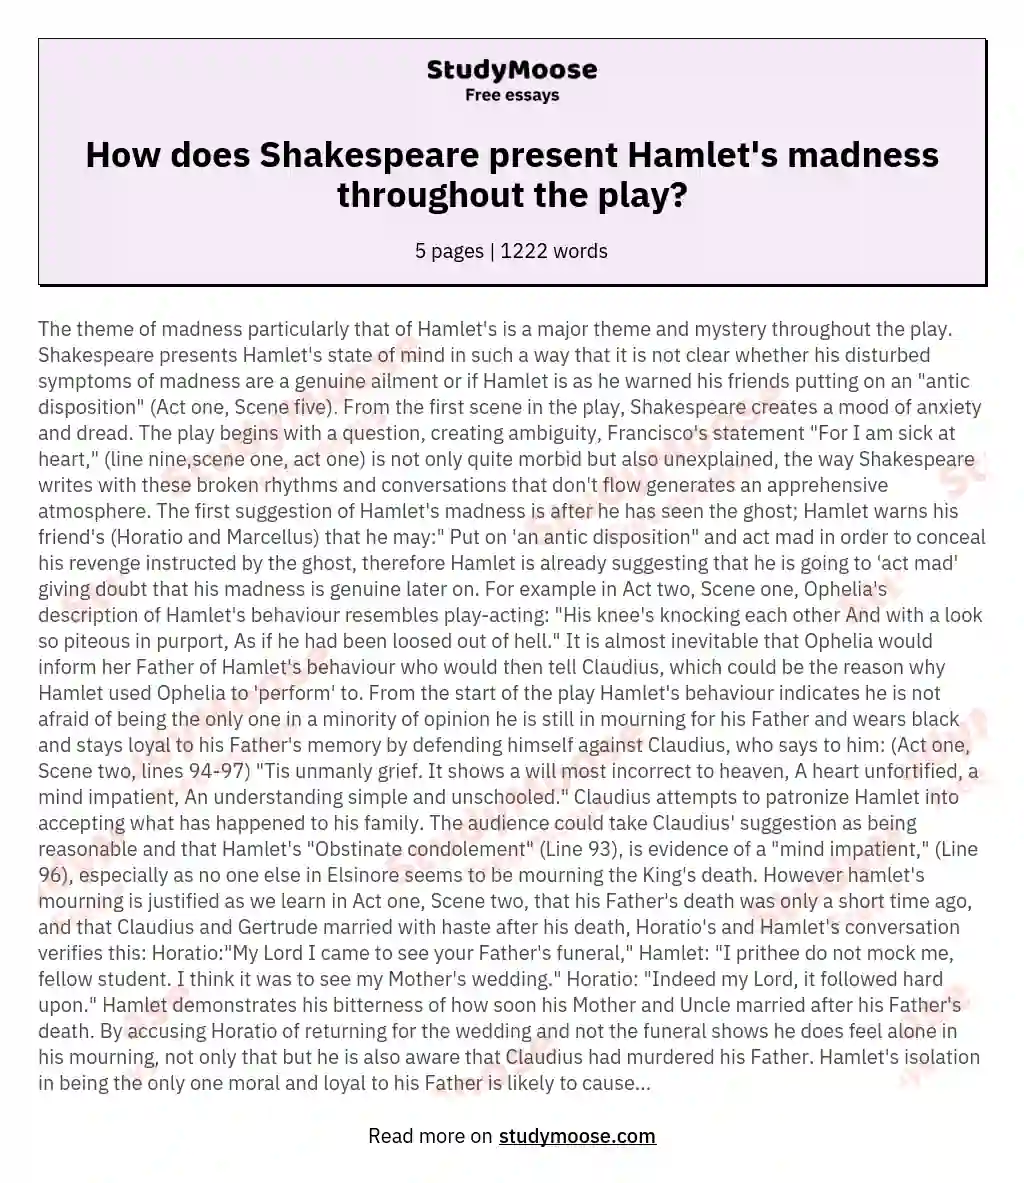 How does Shakespeare present Hamlet's madness throughout the play? essay